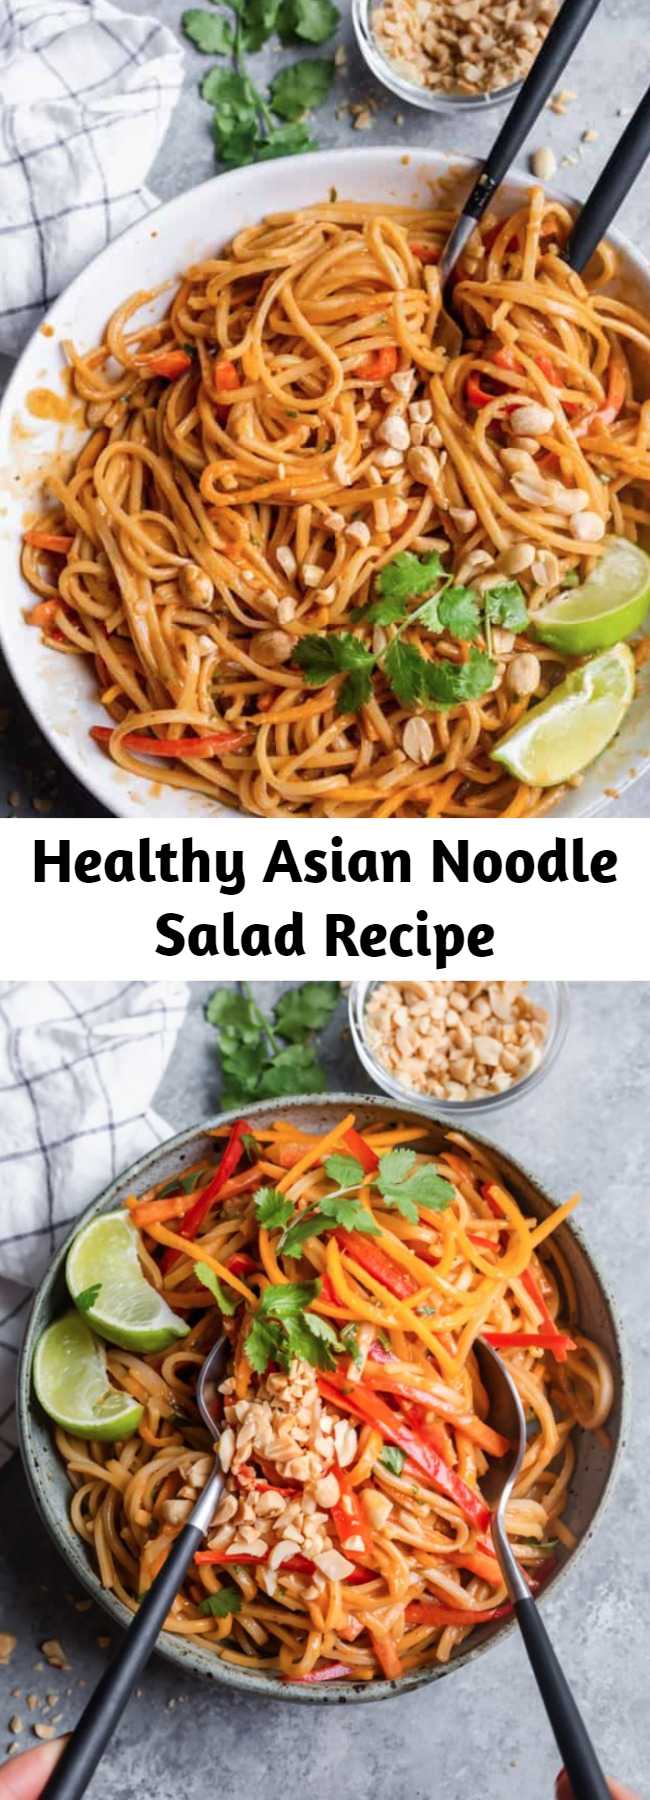 Healthy Asian Noodle Salad Recipe - This bright and colorful Asian Noodle Salad is a gluten-free vegan meal that's filled with fresh vegetables and tossed in a spicy creamy nutty dressing #noodles #asianfood #healthyrecipes #salad